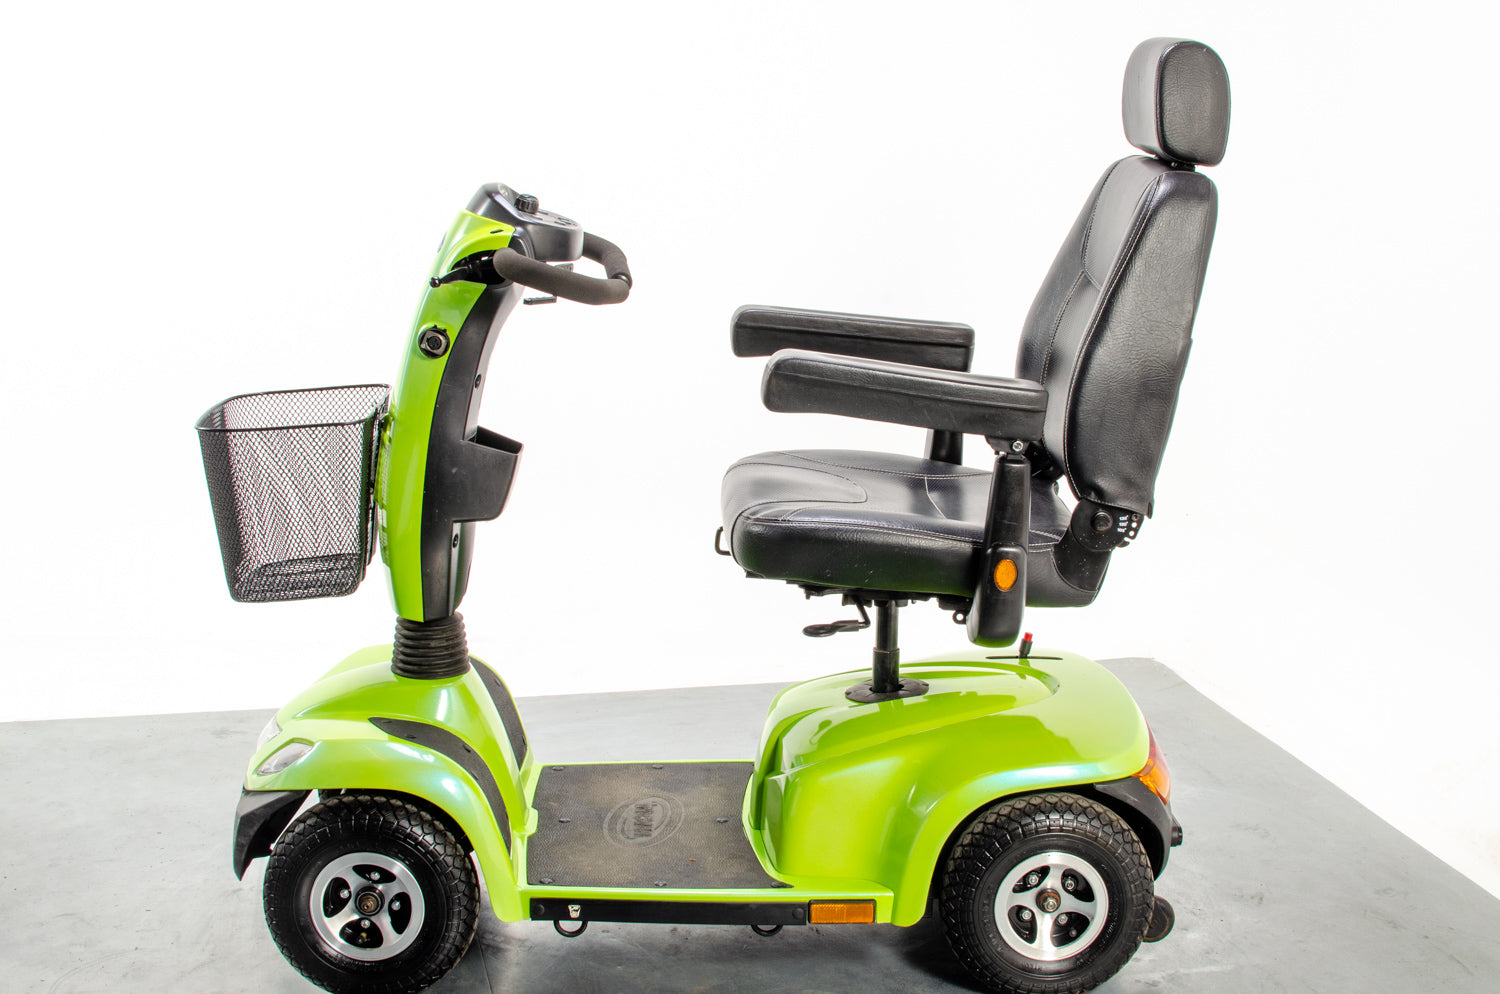 2015 Invacare Orion Used Comfort Mobility Scooter 8mph Pavement Road